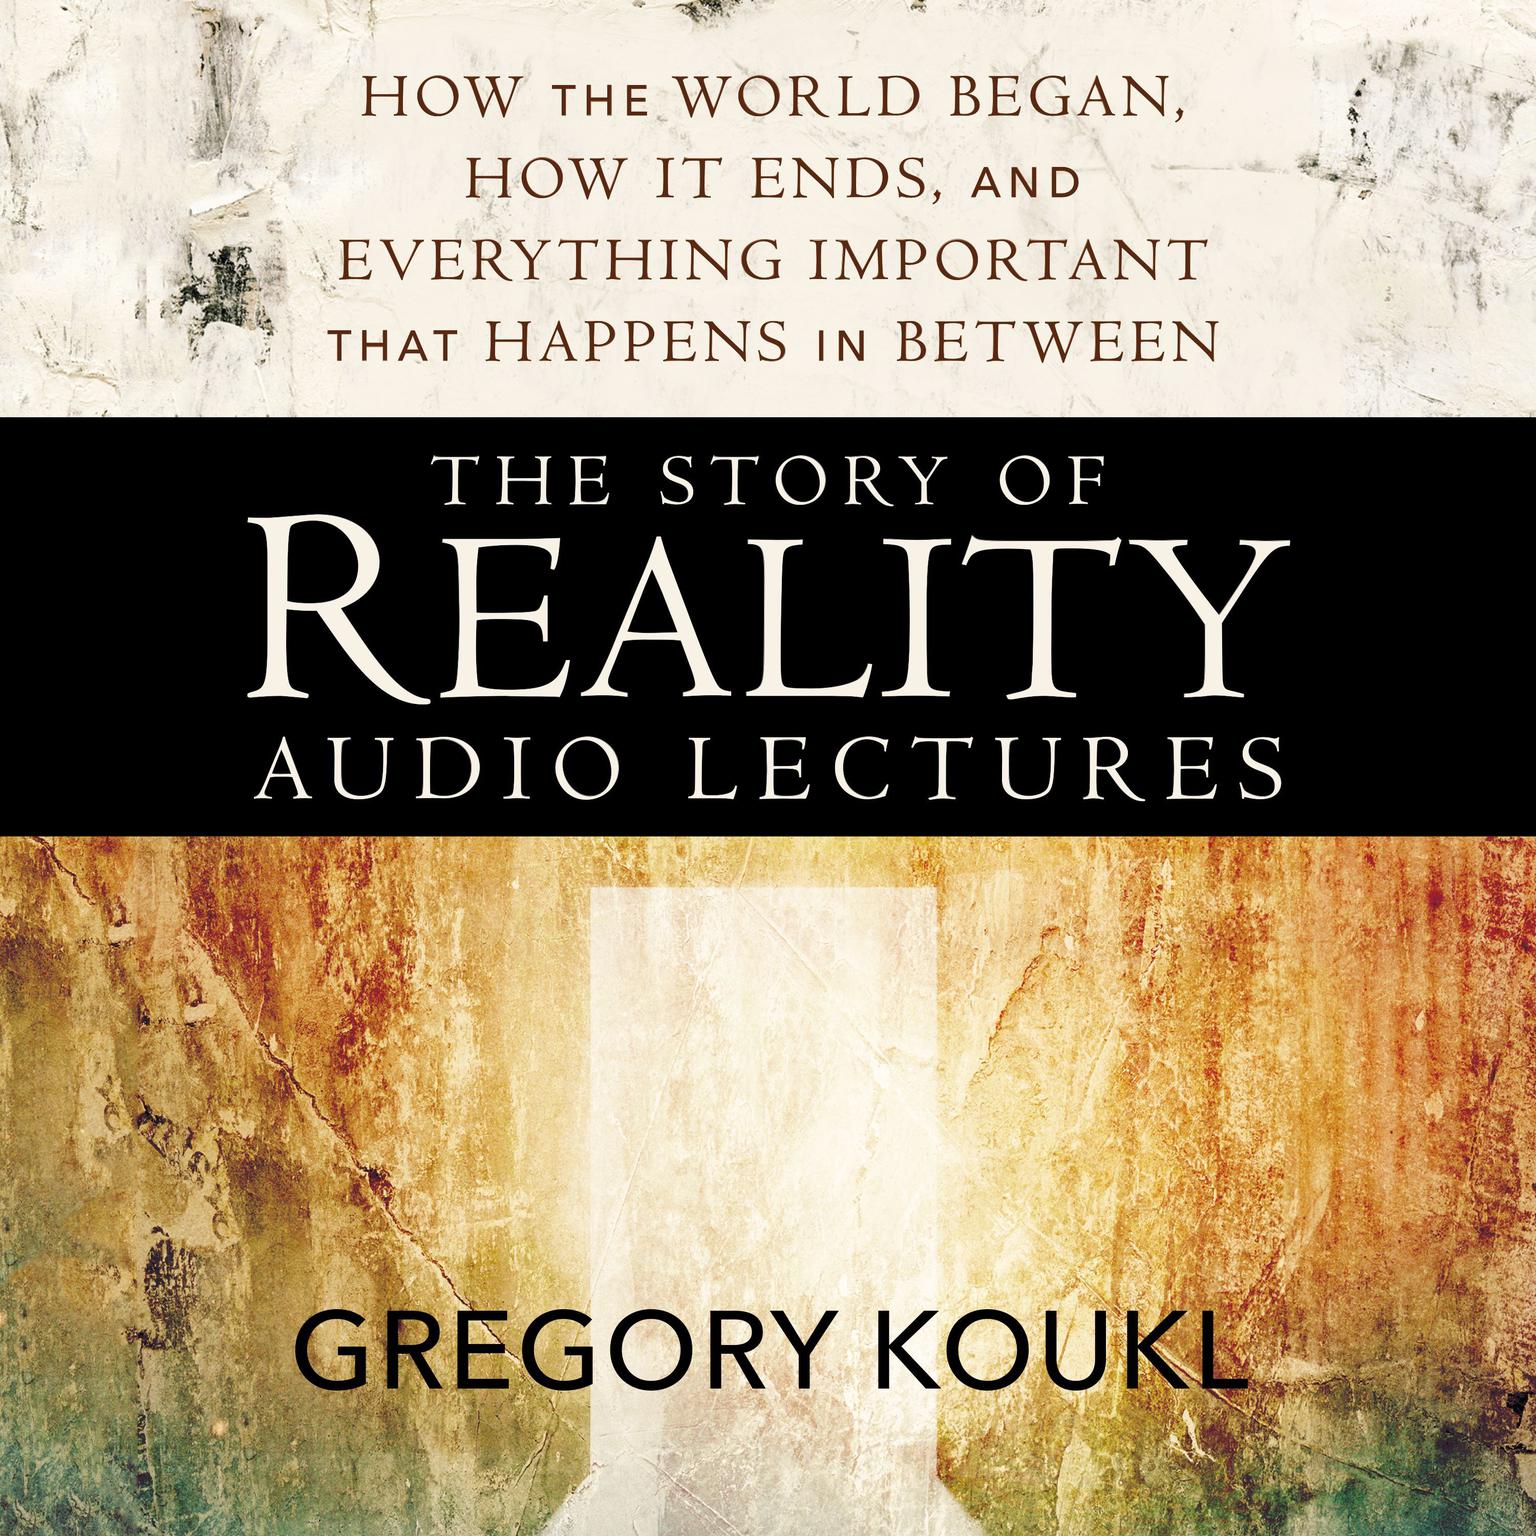 The Story of Reality: Audio Lectures: How the World Began, How it Ends, and Everything Important that Happens in Between Audiobook, by Gregory Koukl